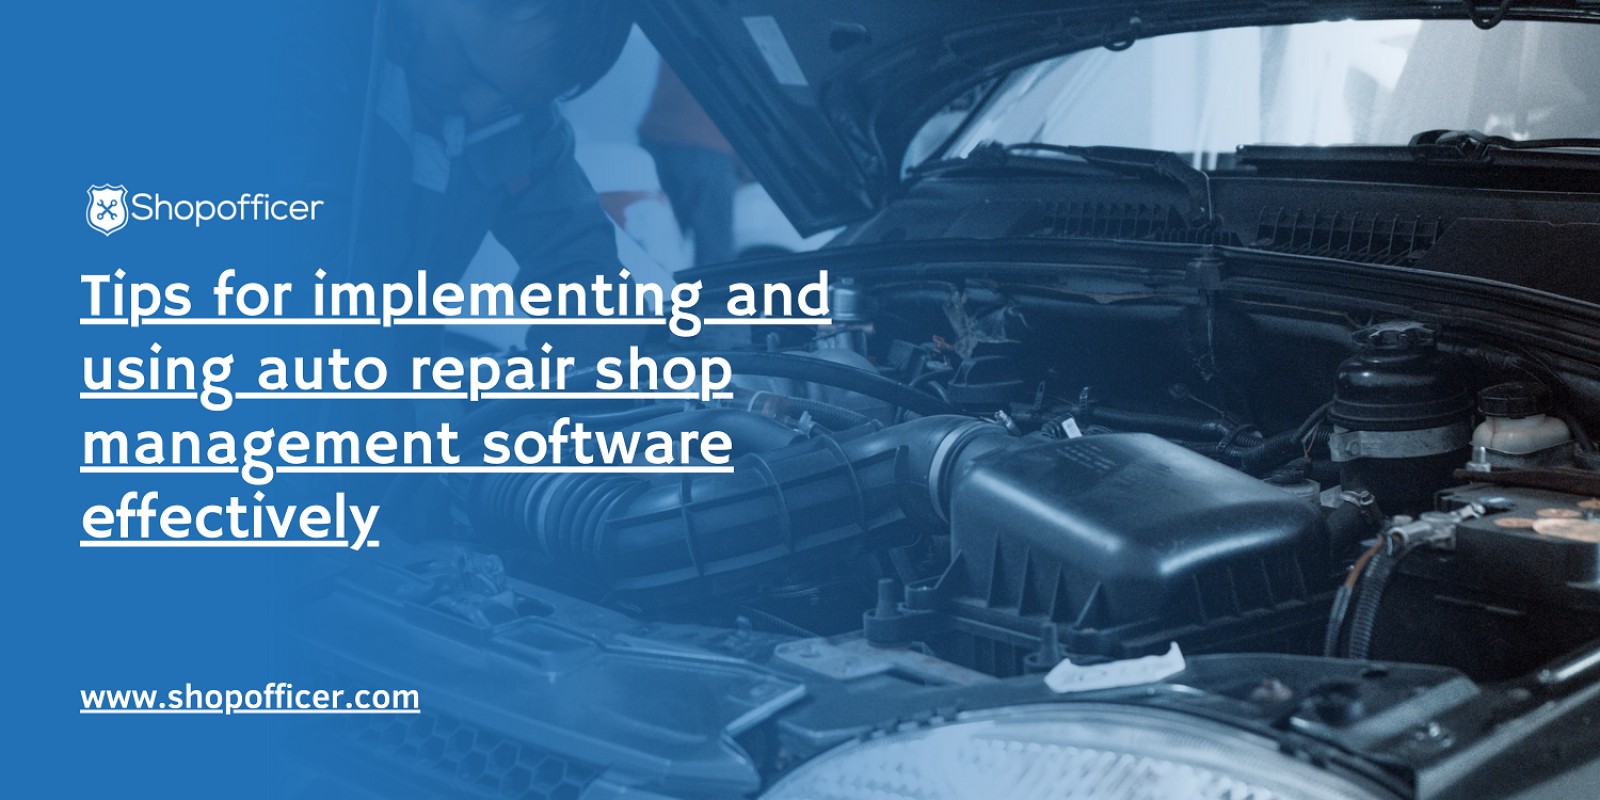 Tips for implementing and using auto repair shop management software effectively